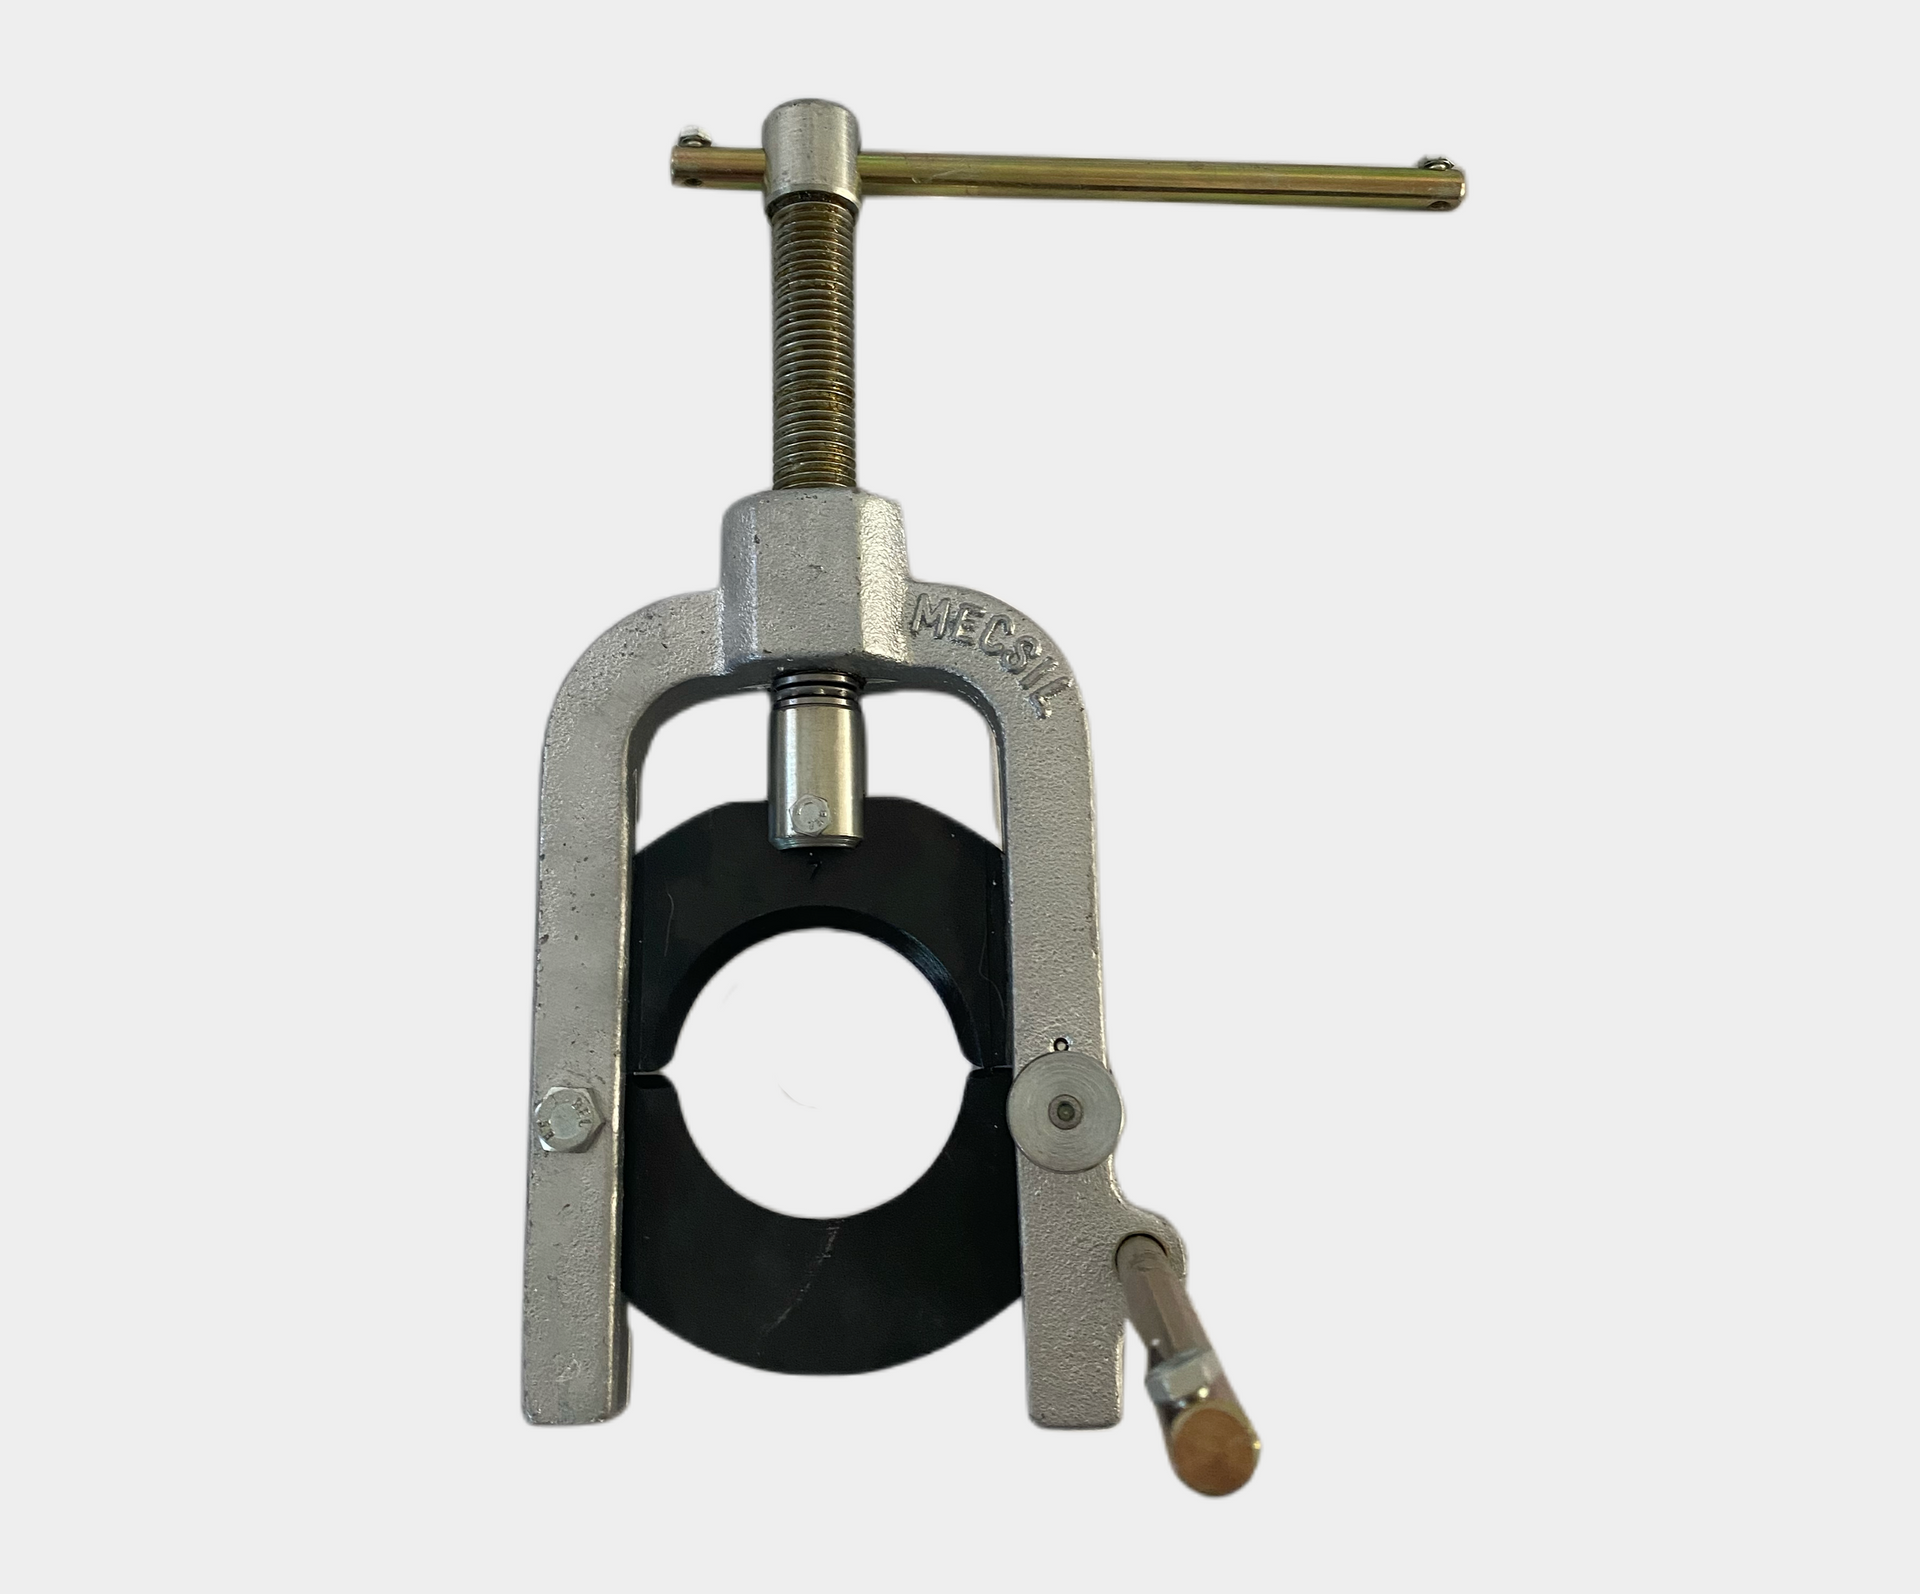 MECSIL Heavy-Duty Cable Cutter – MECSIL TOOLS